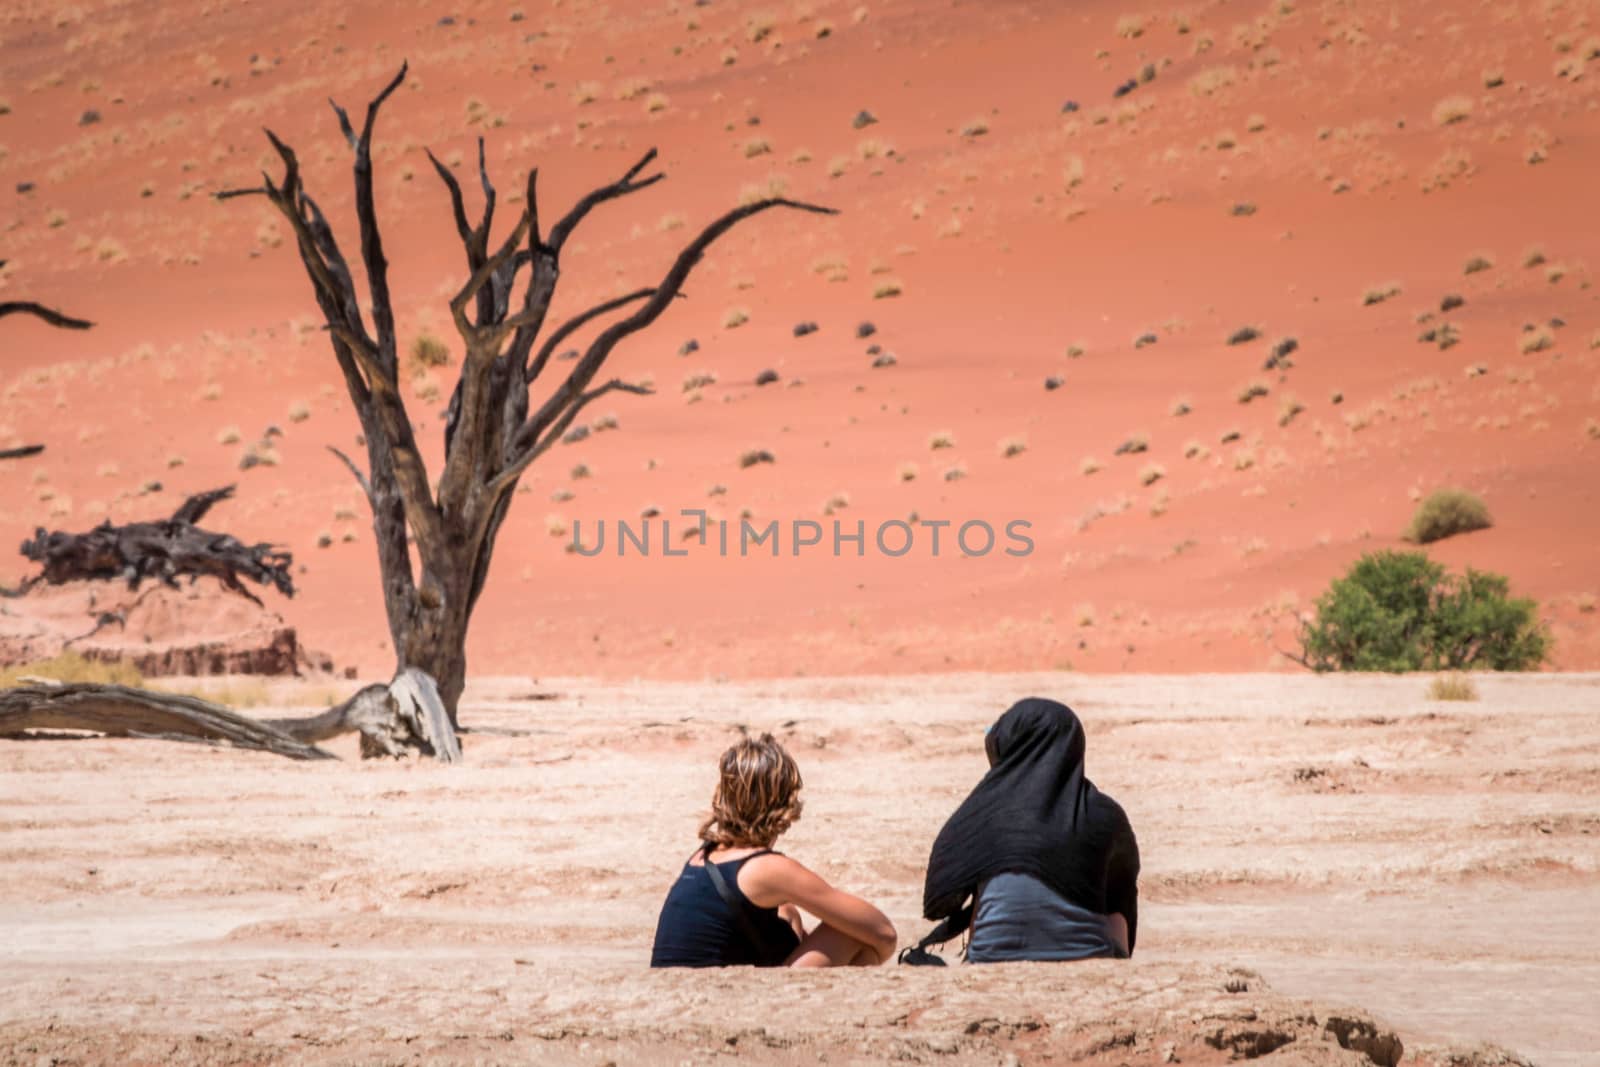 Sossusvlei, Namibia, November 2012: two woman overlooking the deadvlei, red sand and dead trees, taking cover for the heat in Namibia